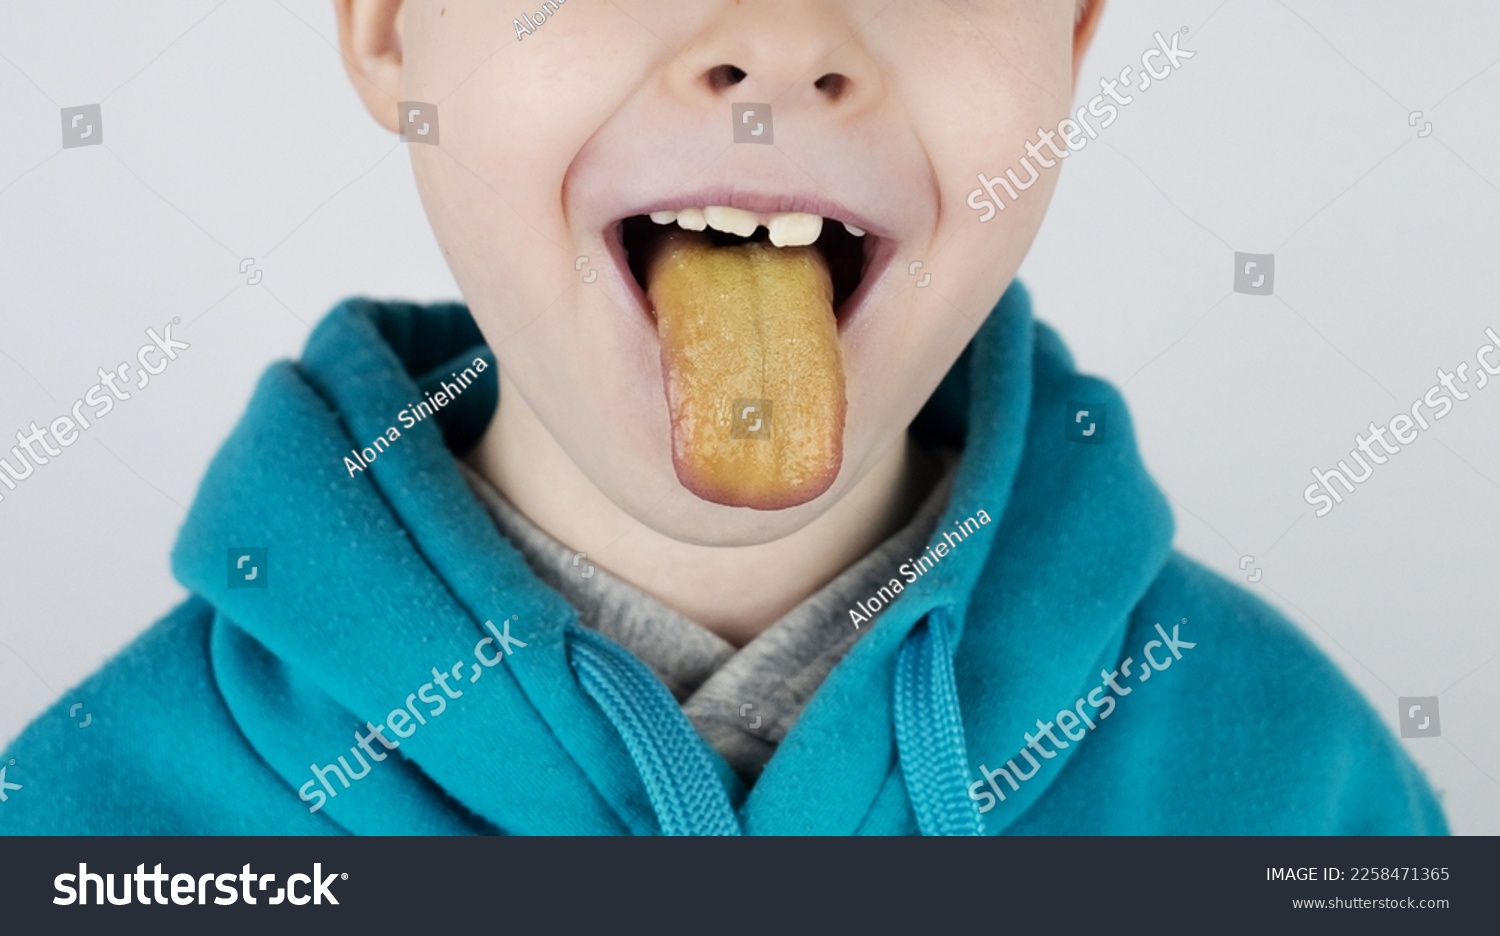 Blond boy has a yellow tongue. Painful yellow coating on the mucous membrane of the tongue. Diseases of the gastrointestinal tract, liver and gallbladder. The consequences of taking antibiotics. #2258471365